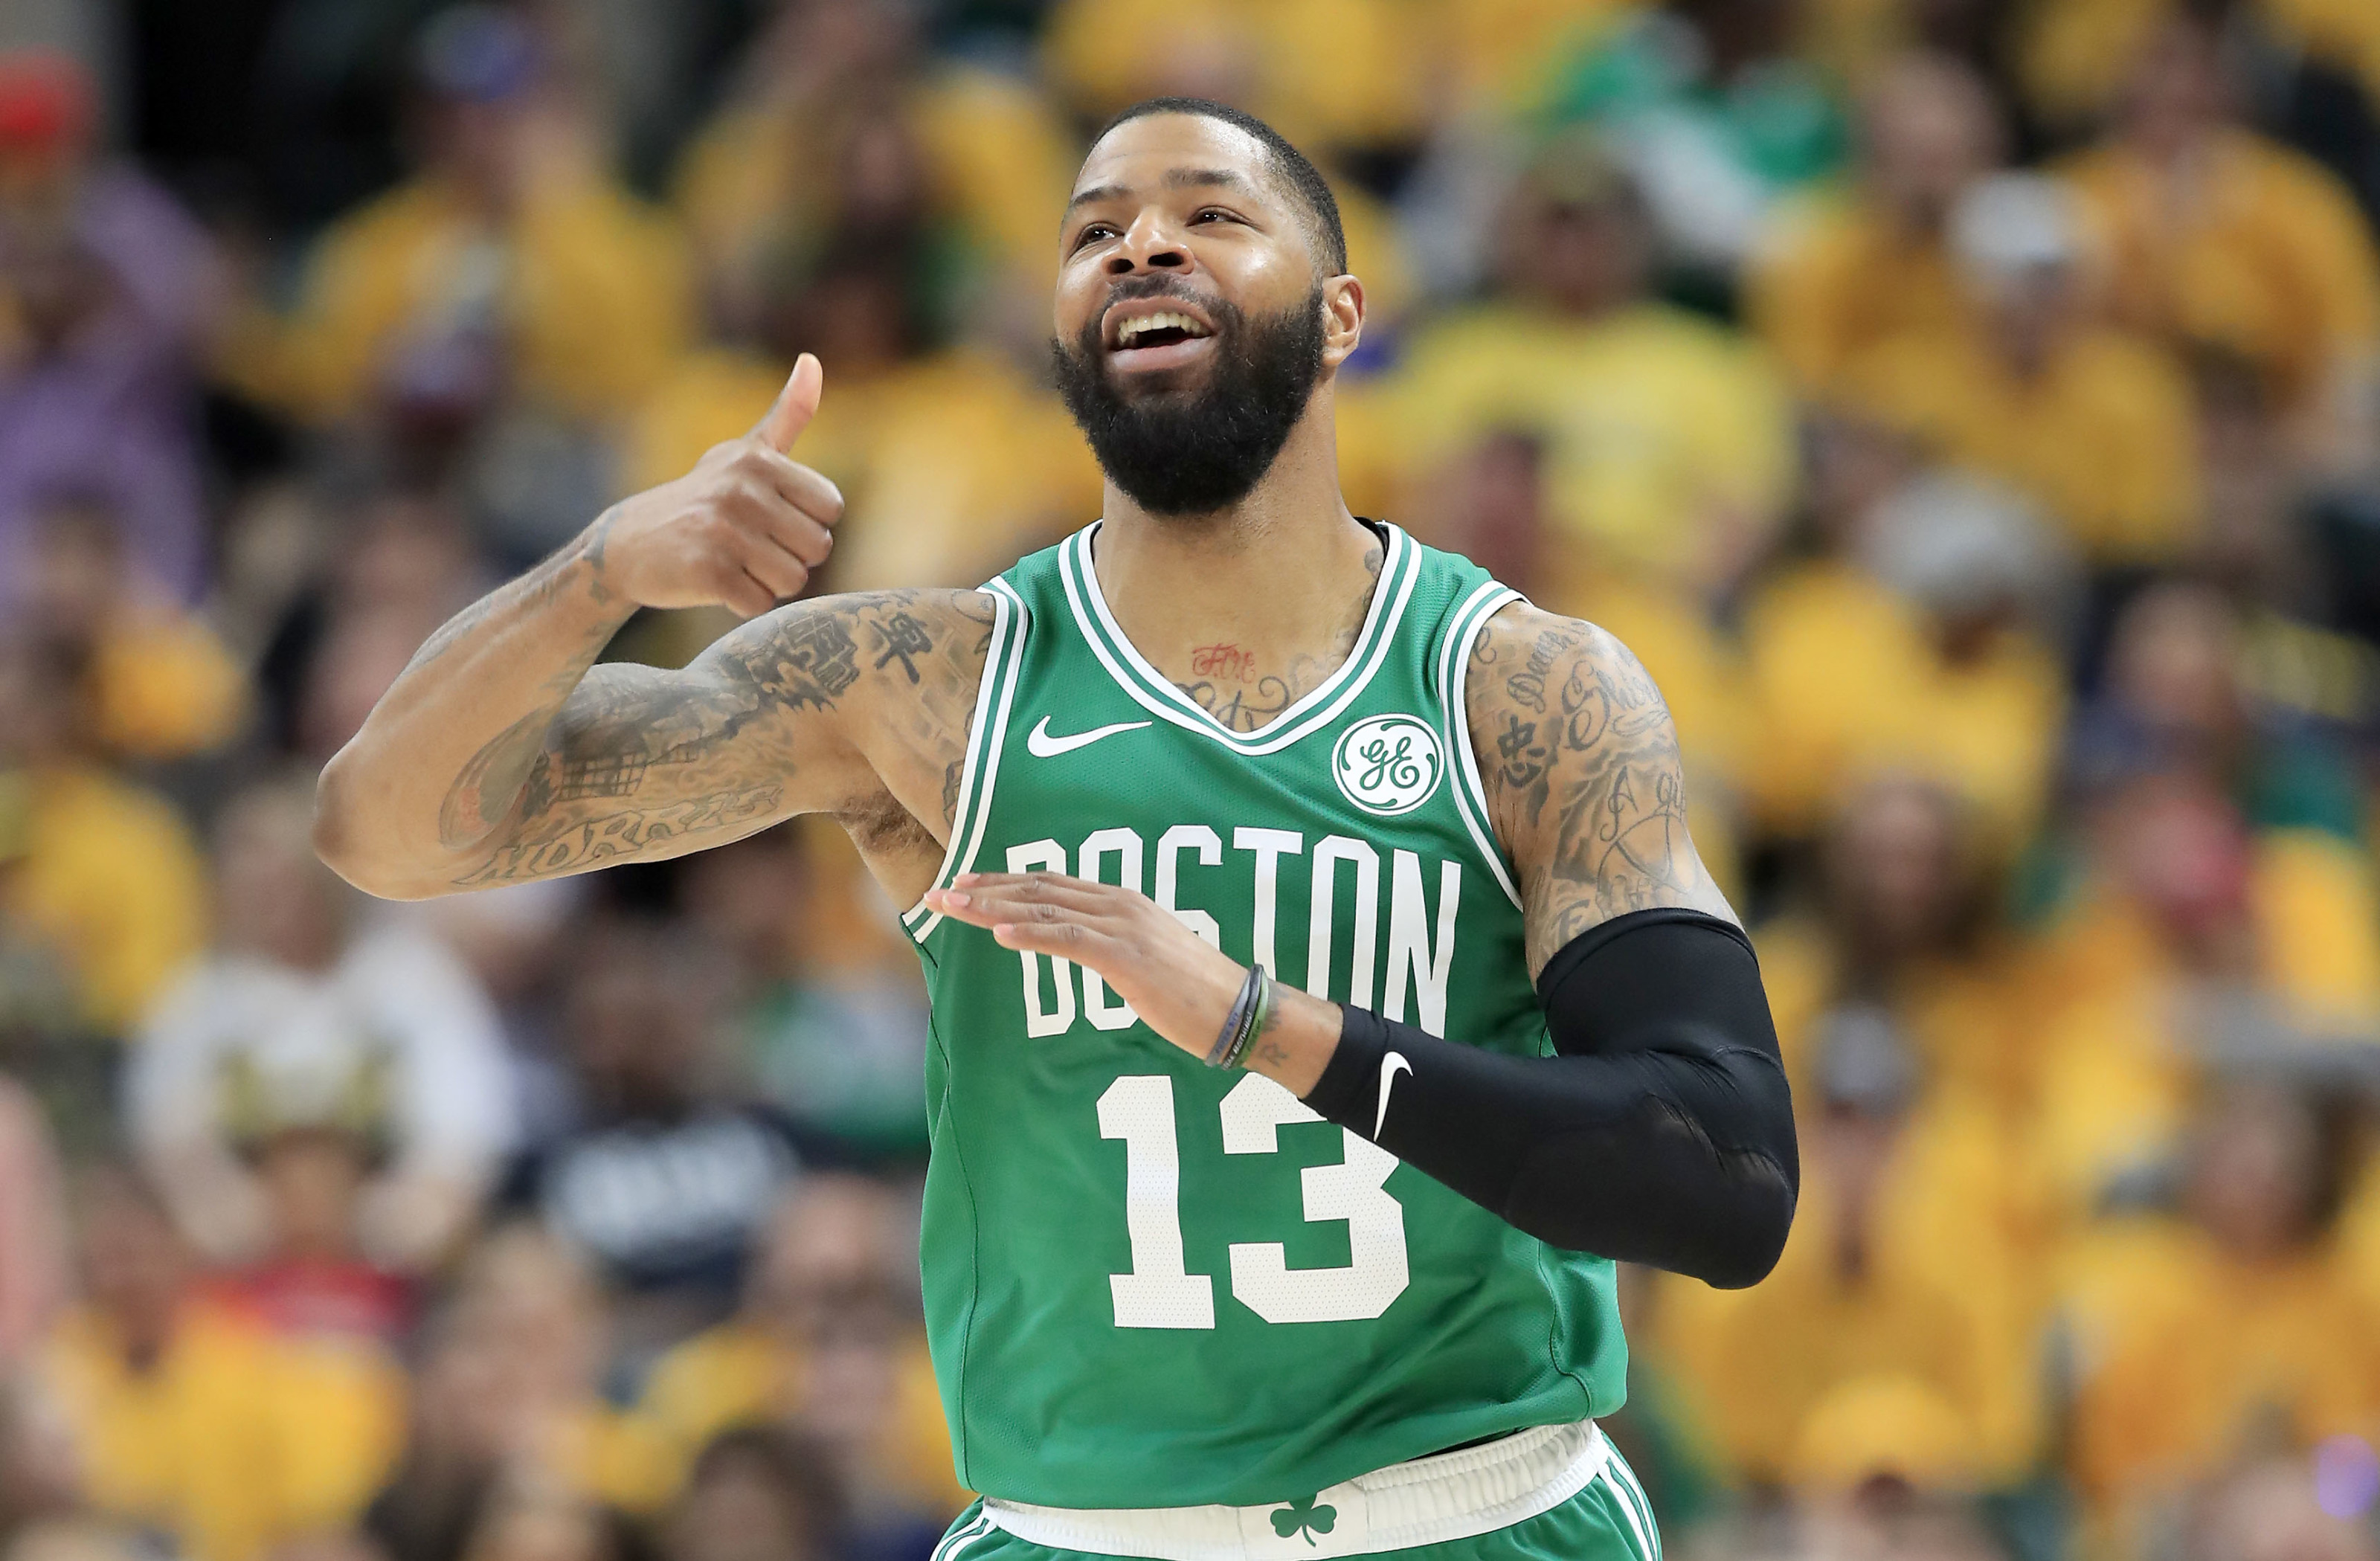 Boston 5 destinations for Marcus Morris in free agency